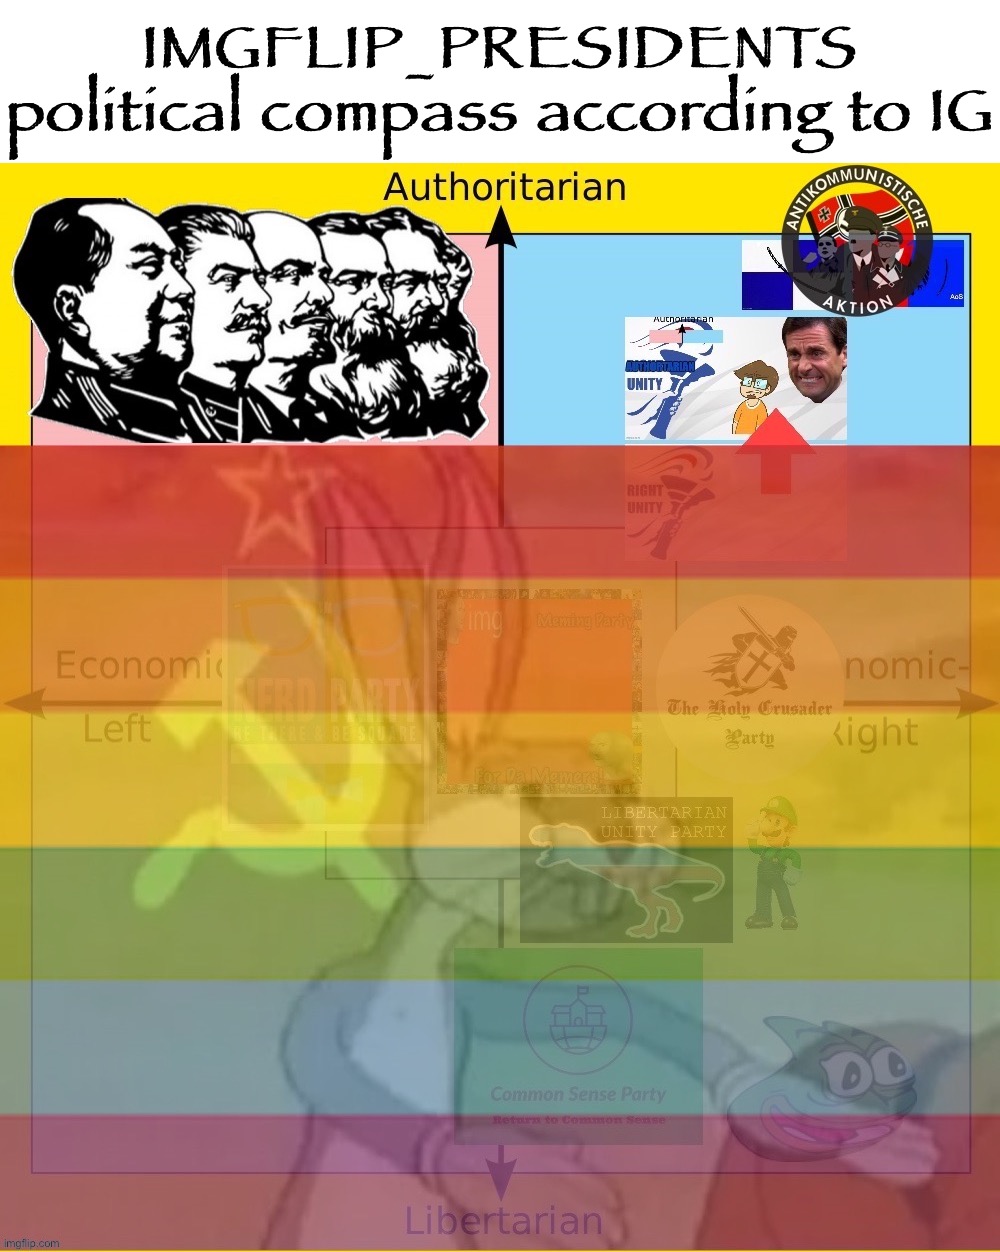 Ah yes, even the “old RUP” are now irredeemable homo-commies | IMGFLIP_PRESIDENTS political compass according to IG | image tagged in imgflip_presidents political compass according to ig,imgflip_presidents,homo,commie,takeover,yo | made w/ Imgflip meme maker